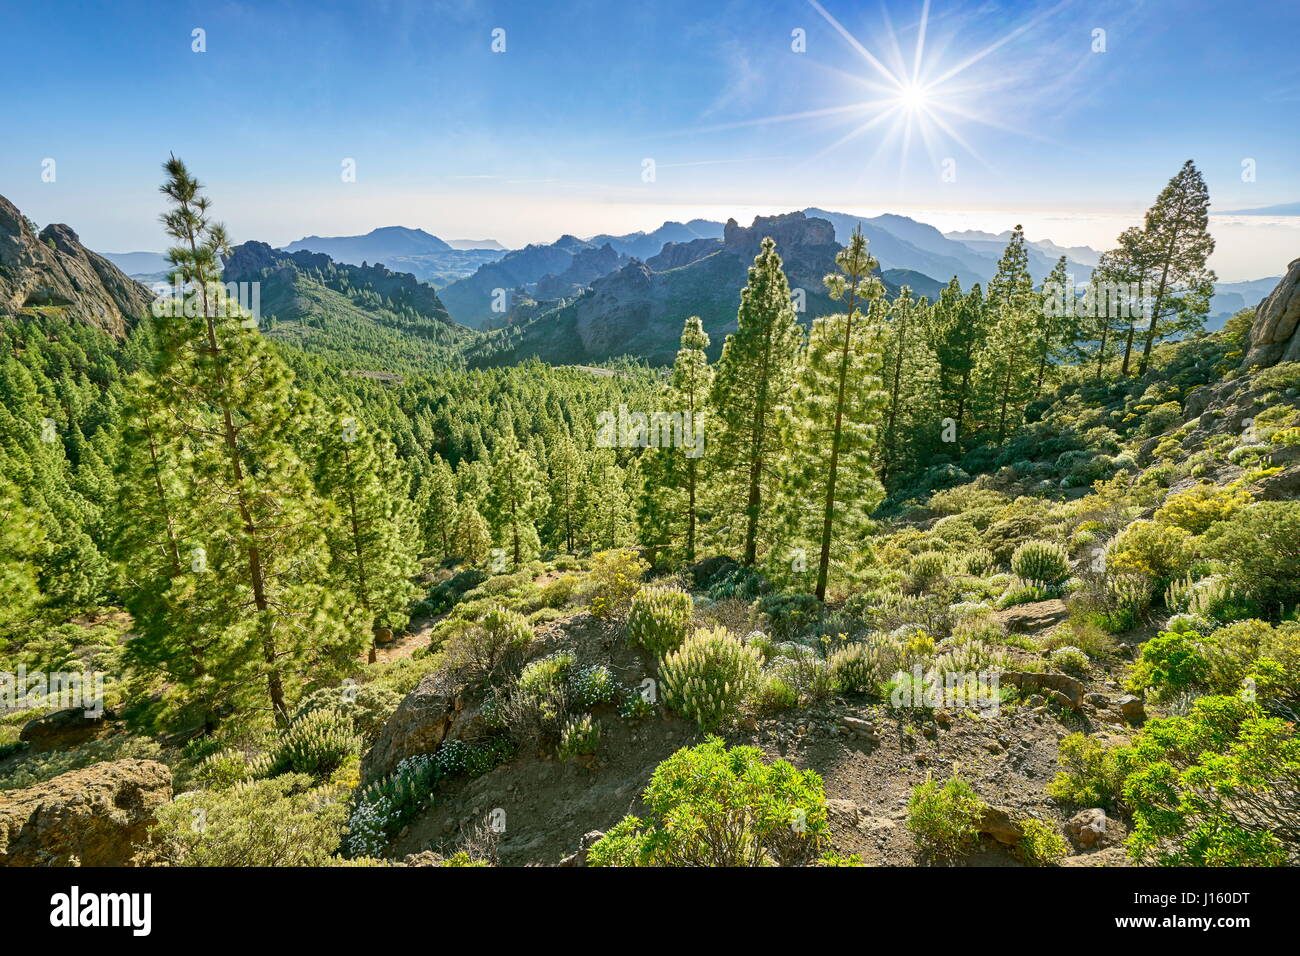 Mountain landscape on the way to Roque Nublo, Gran Canaria, Spain Stock Photo